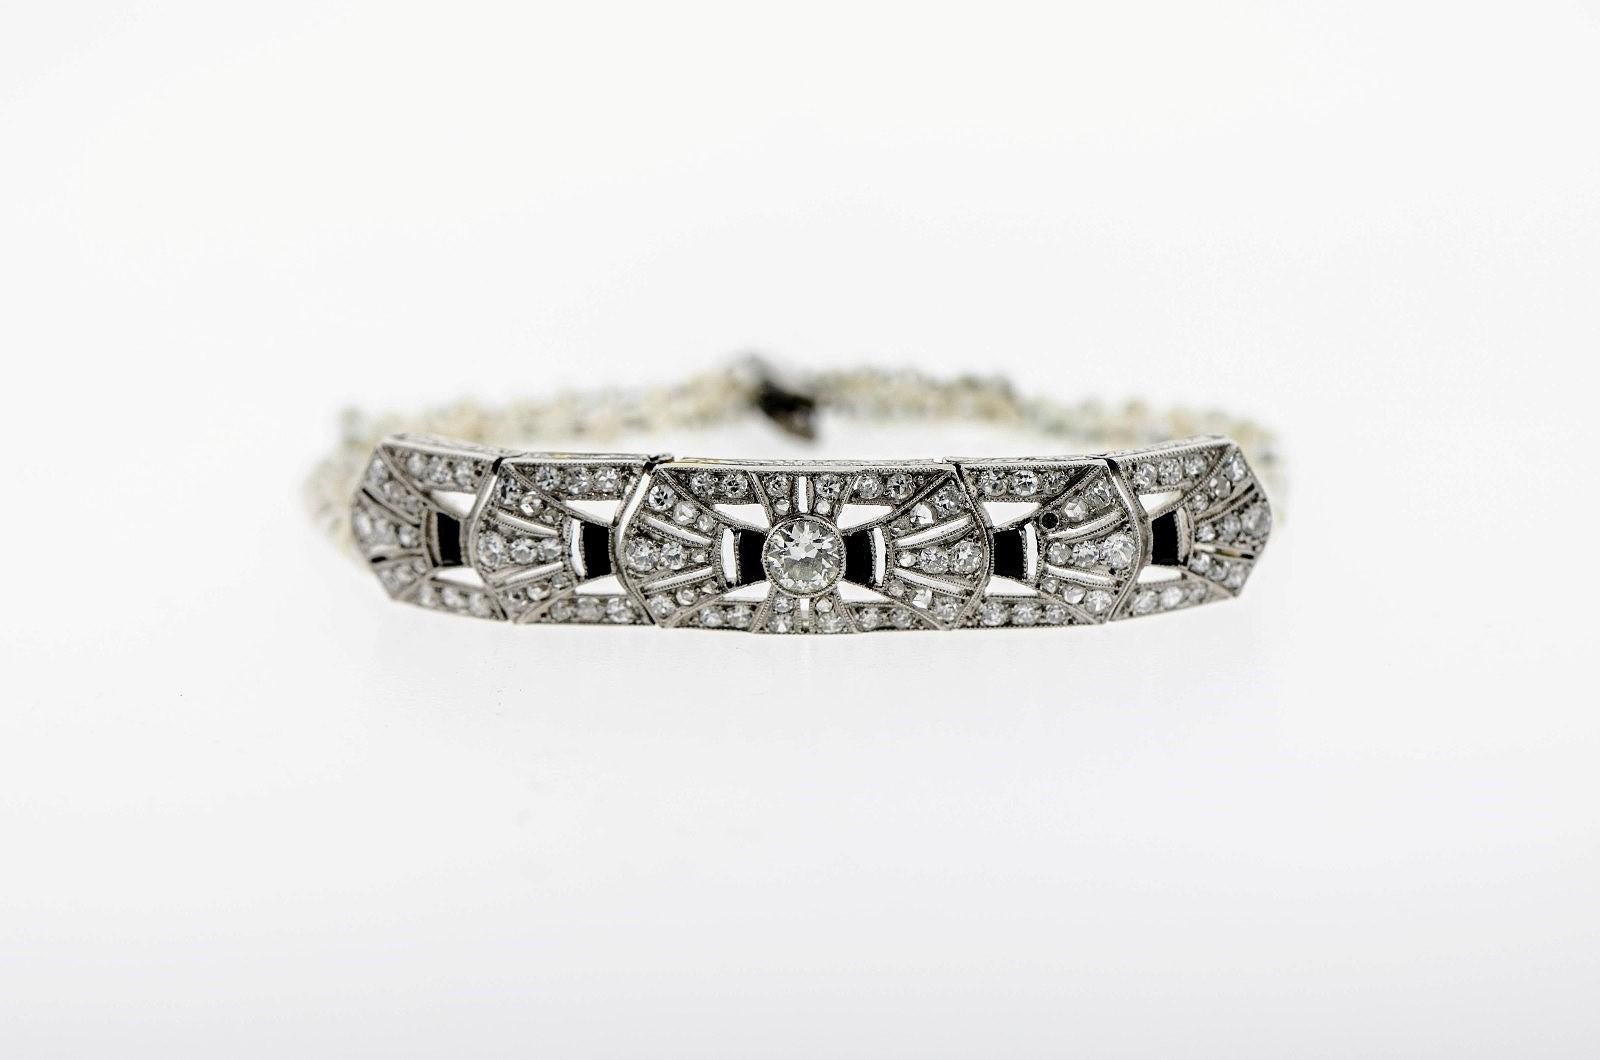 A gorgeous 1920s Art Deco period bracelet.  The articulated platinum plaque centers a 0.70 carat old round diamond, and six calibre cut black Onyx and old cut Diamonds radiate outward, each end with three strands of Natural Seed Pearls. The Pearls